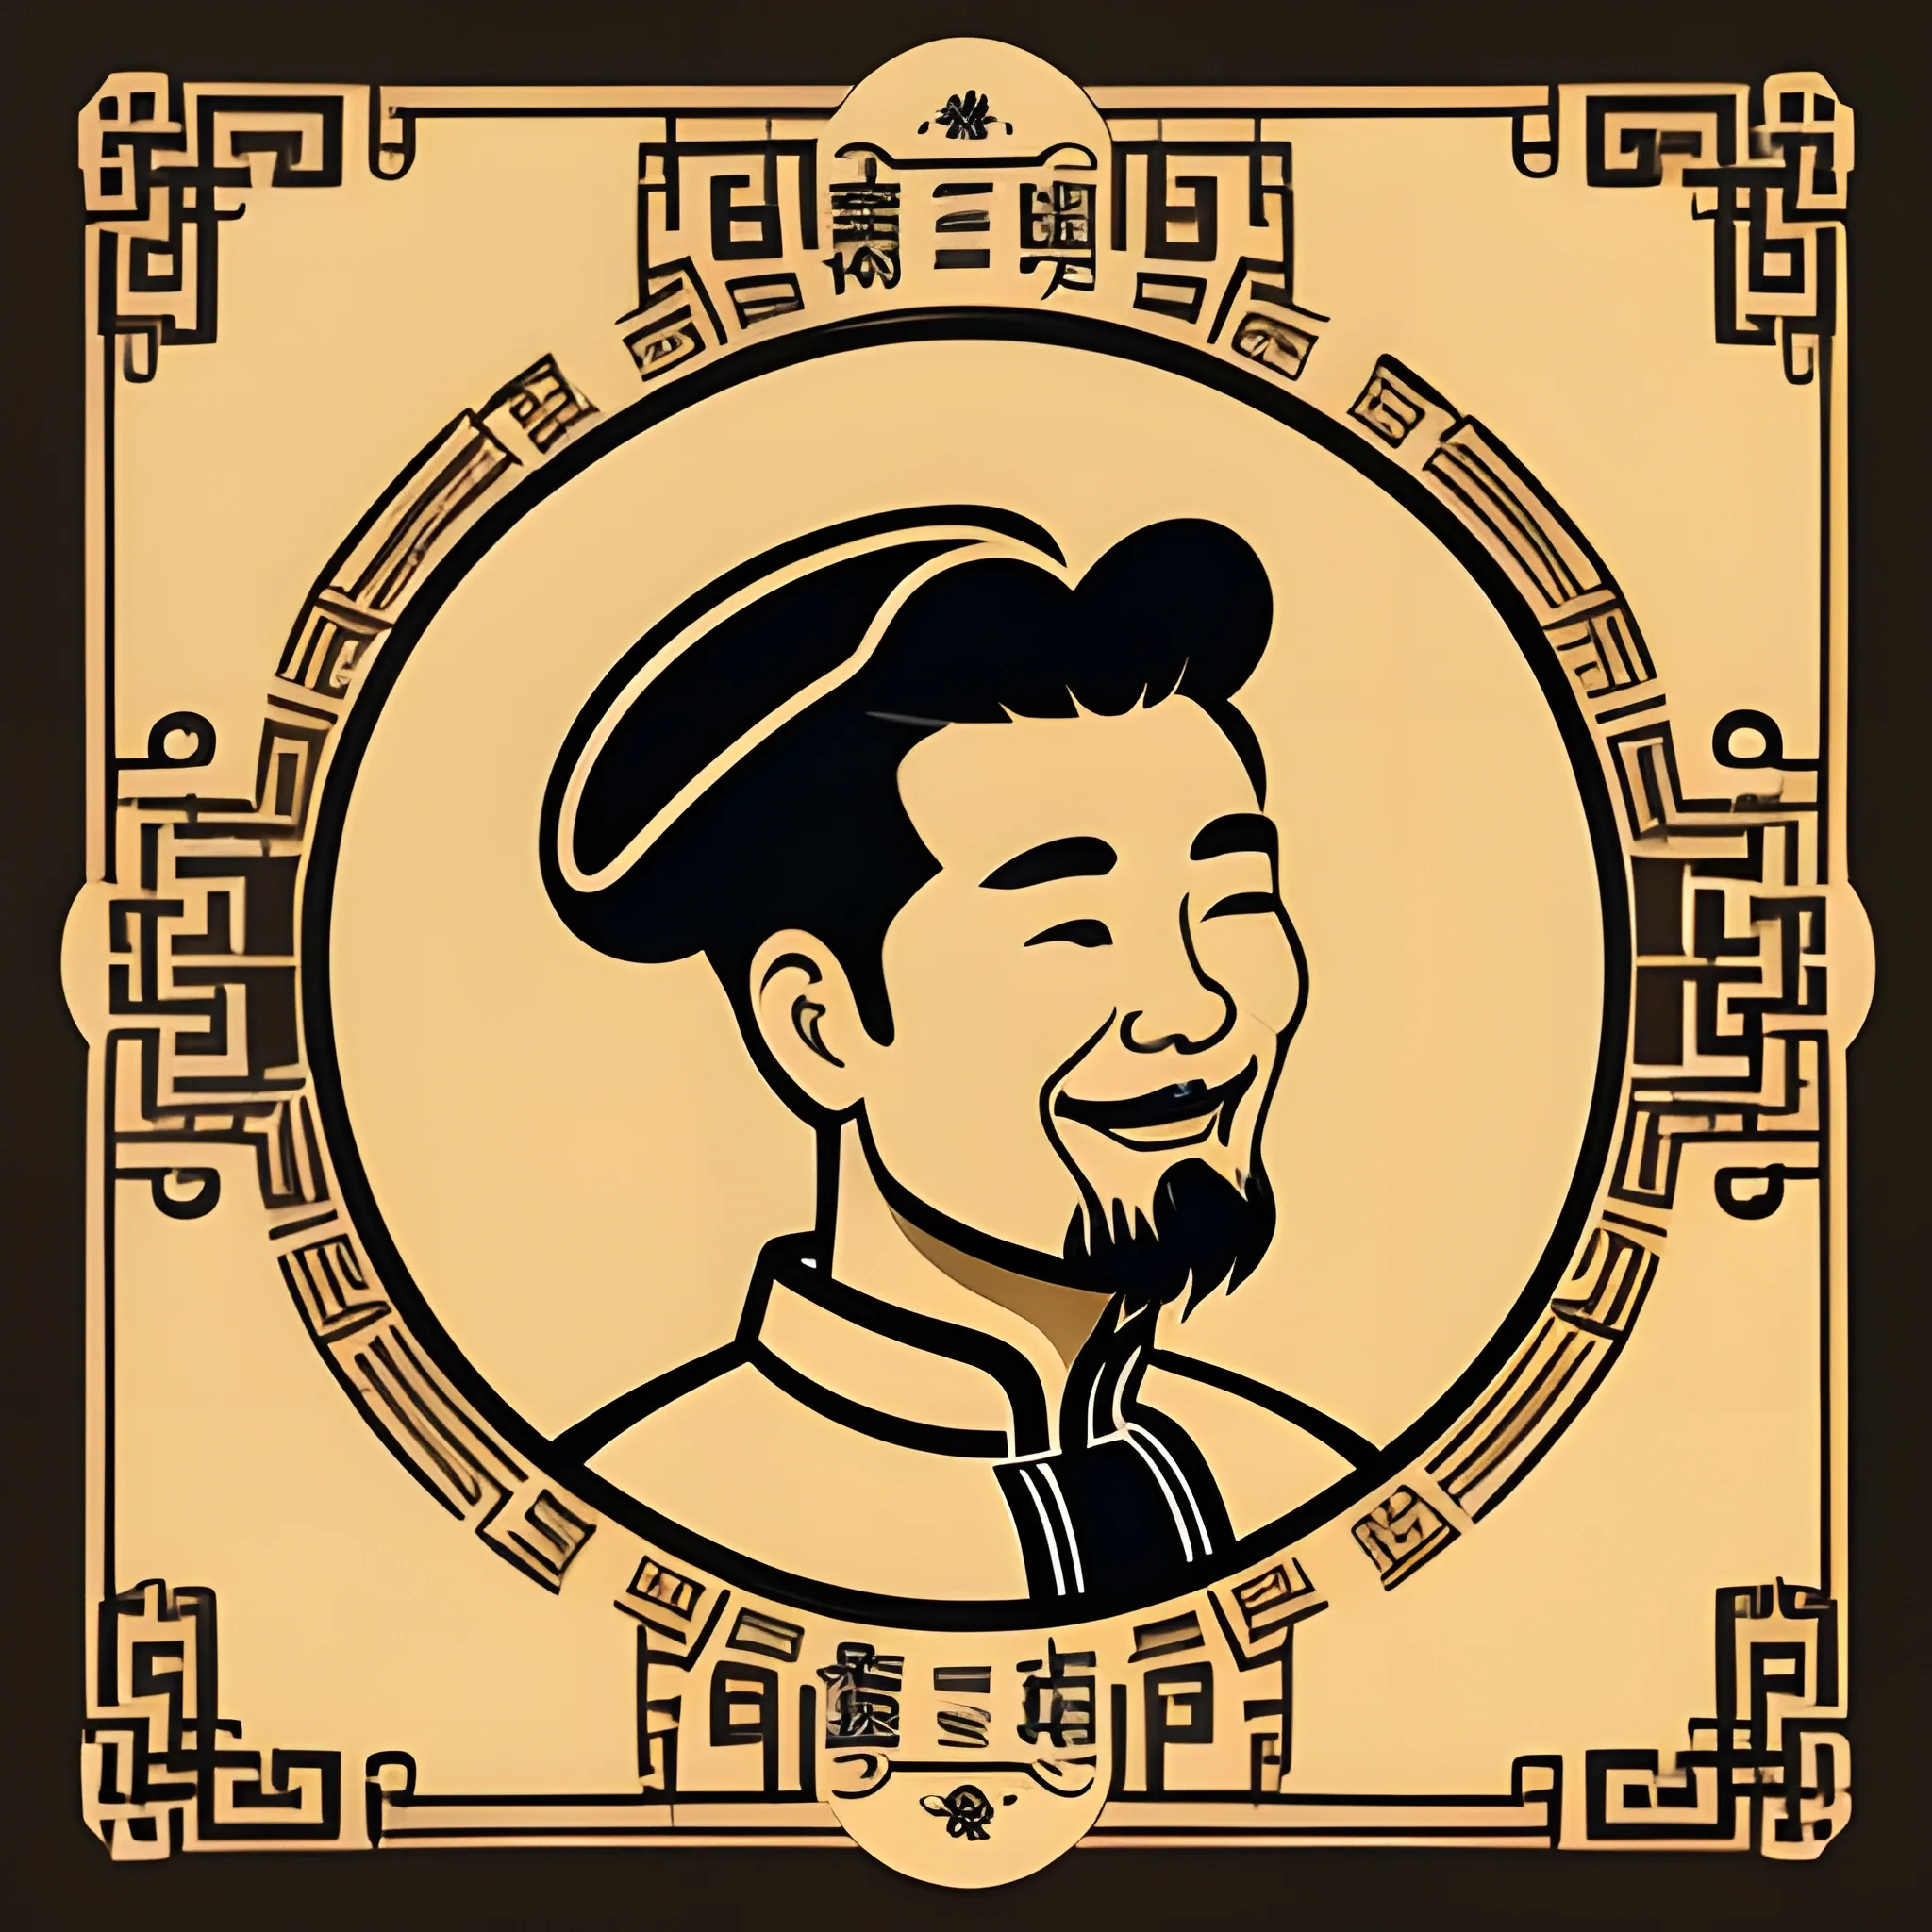 Create a unique and creative logo design for Fong’s Garden. Male chef iconic, wear chef hat, banner text is Fong's Garden place under the logo of head, Black and brown hair, smaile face but no see the teeth. more chinese style overall style. add some food dished around the logo